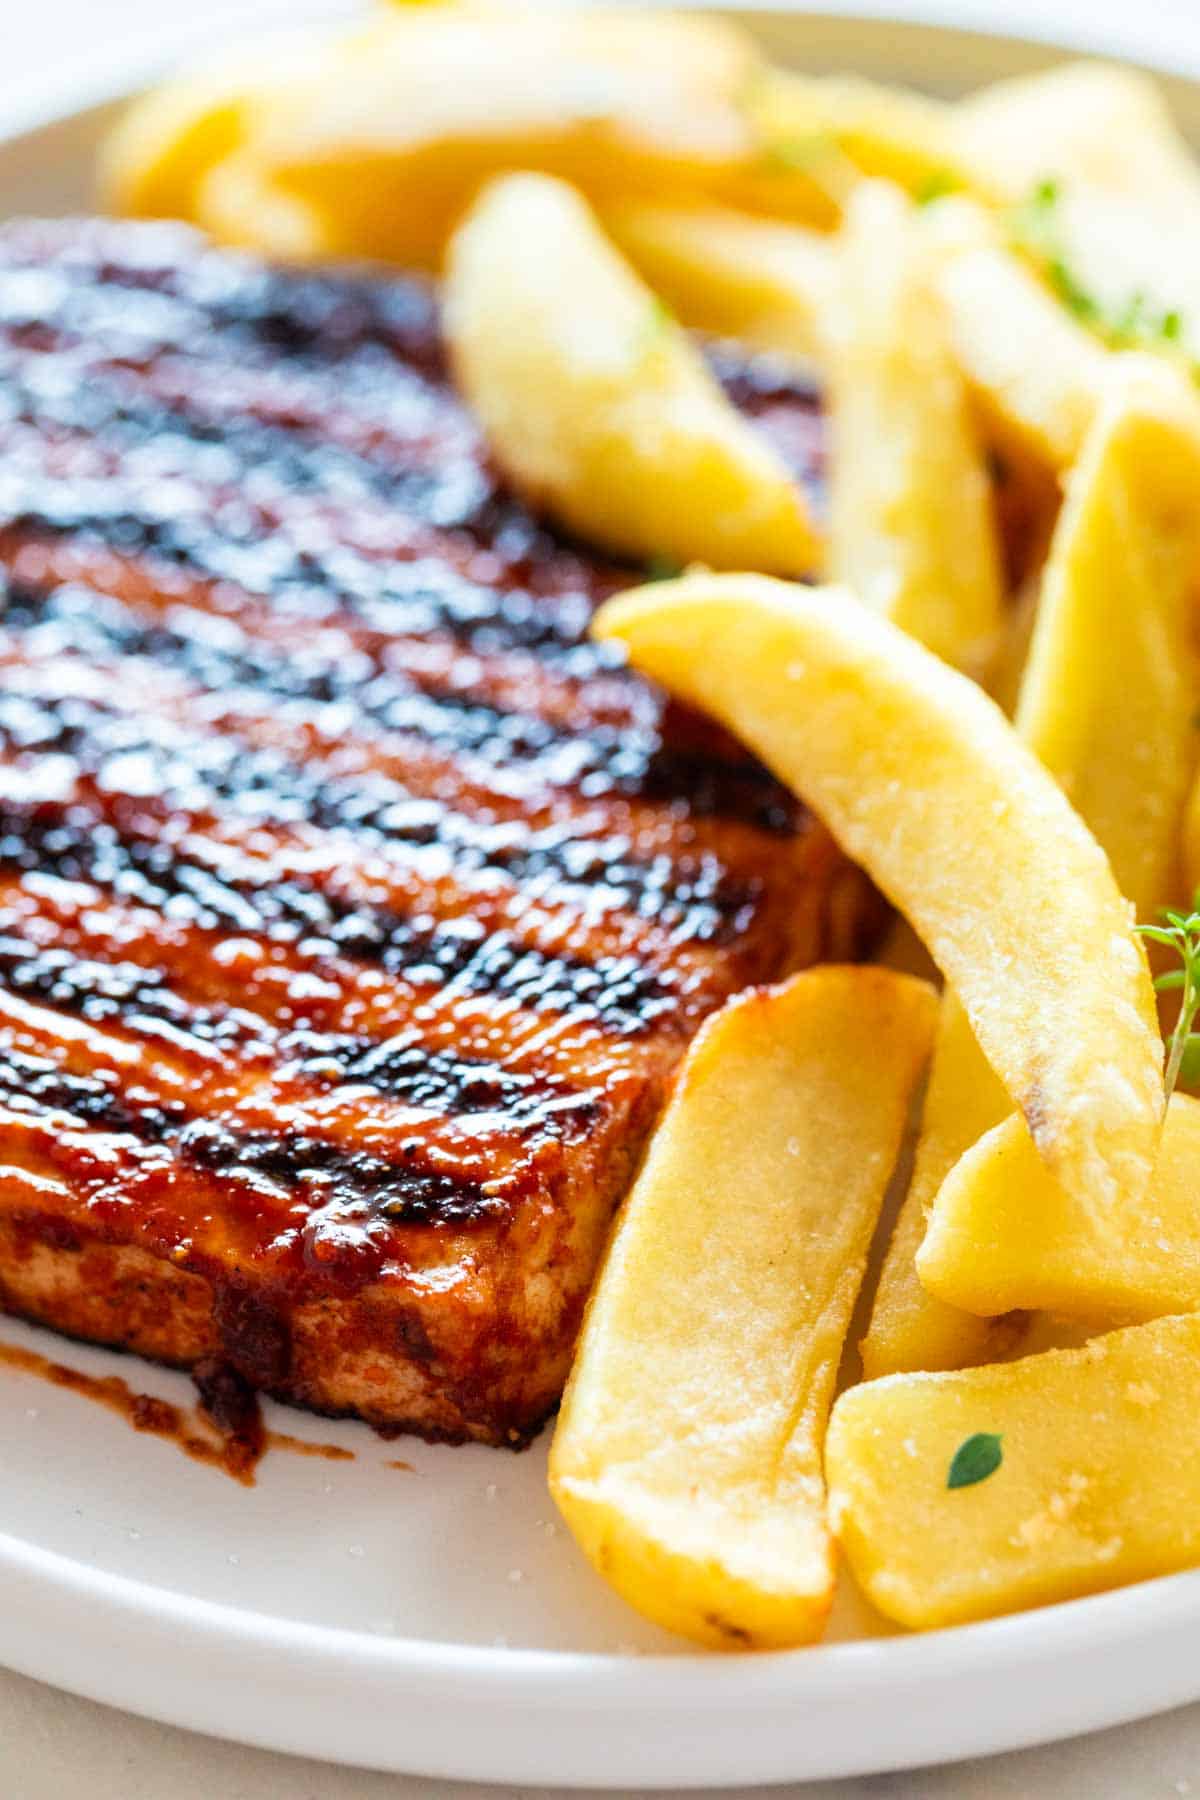 Grilled tofu steak and French fries on a plate.